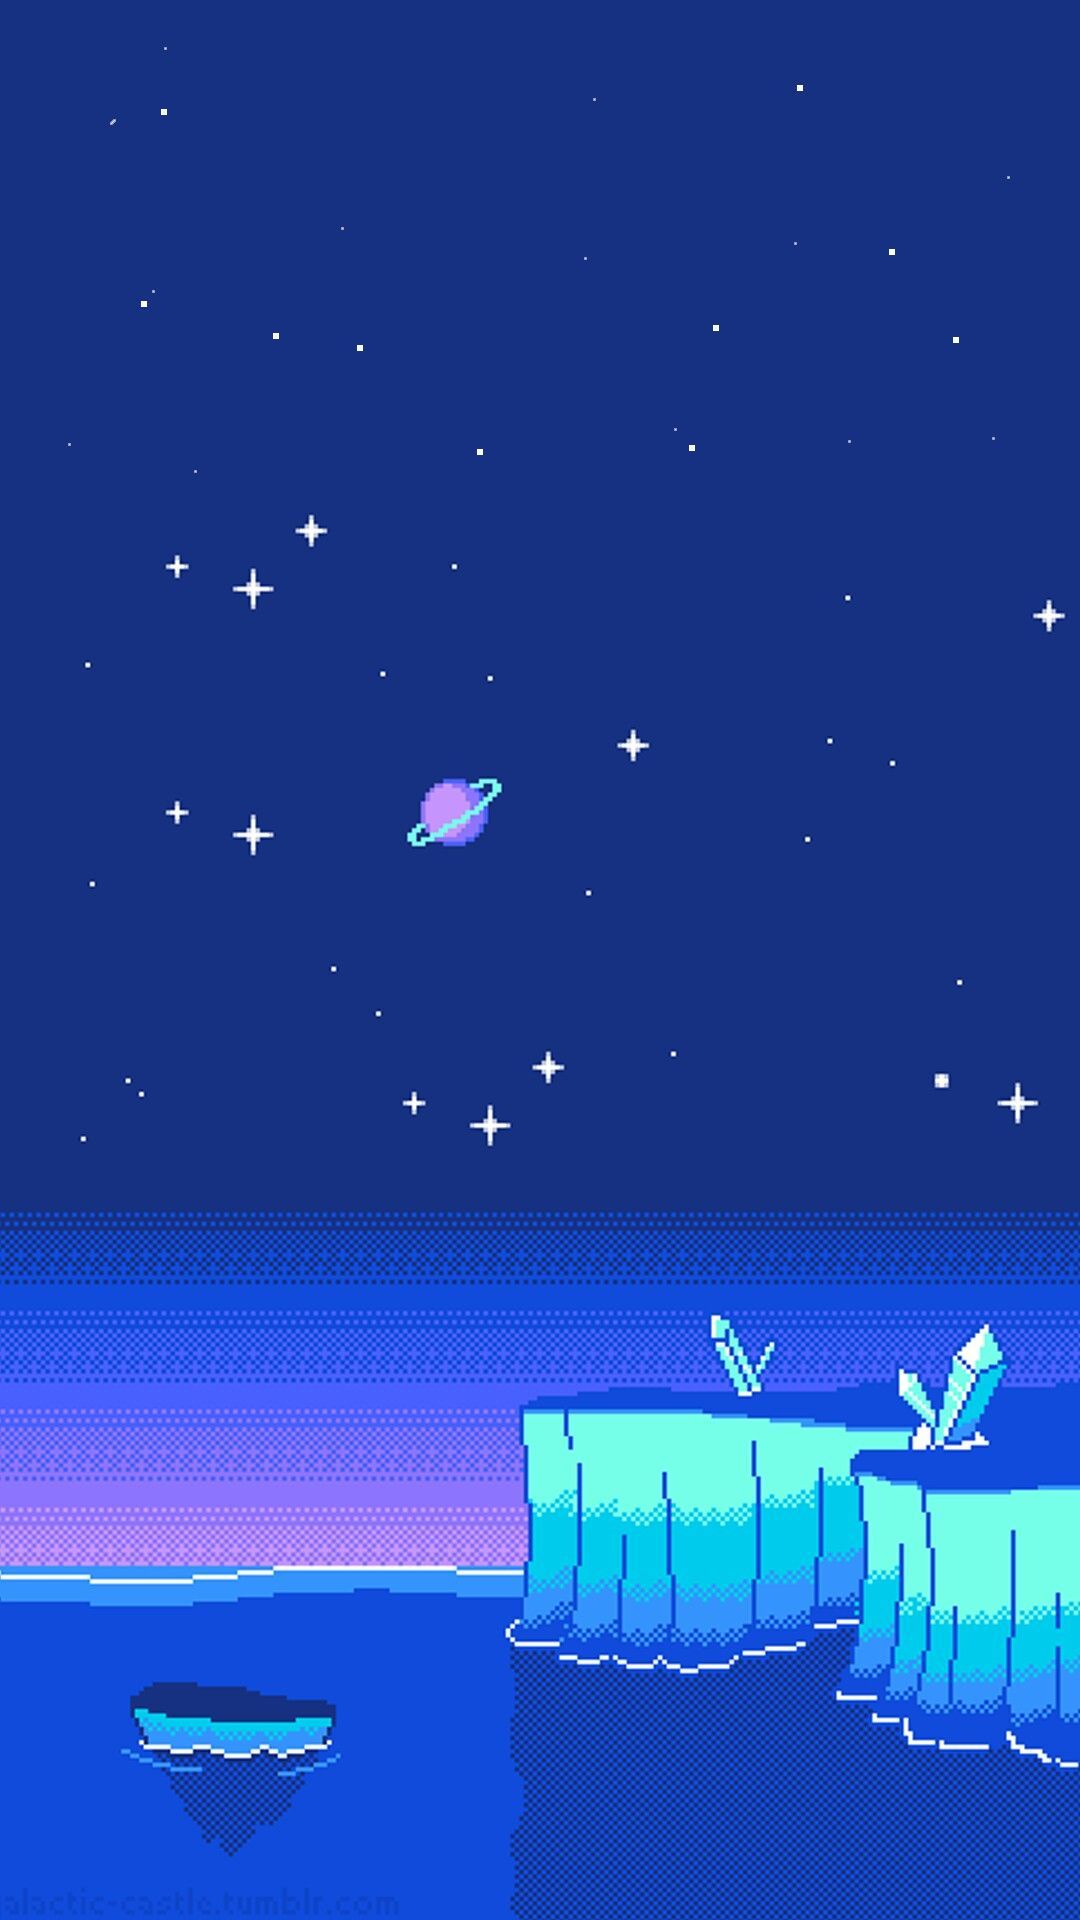 1080x1920 wallpaper of a whale jumping out of the water - Pixel art, art